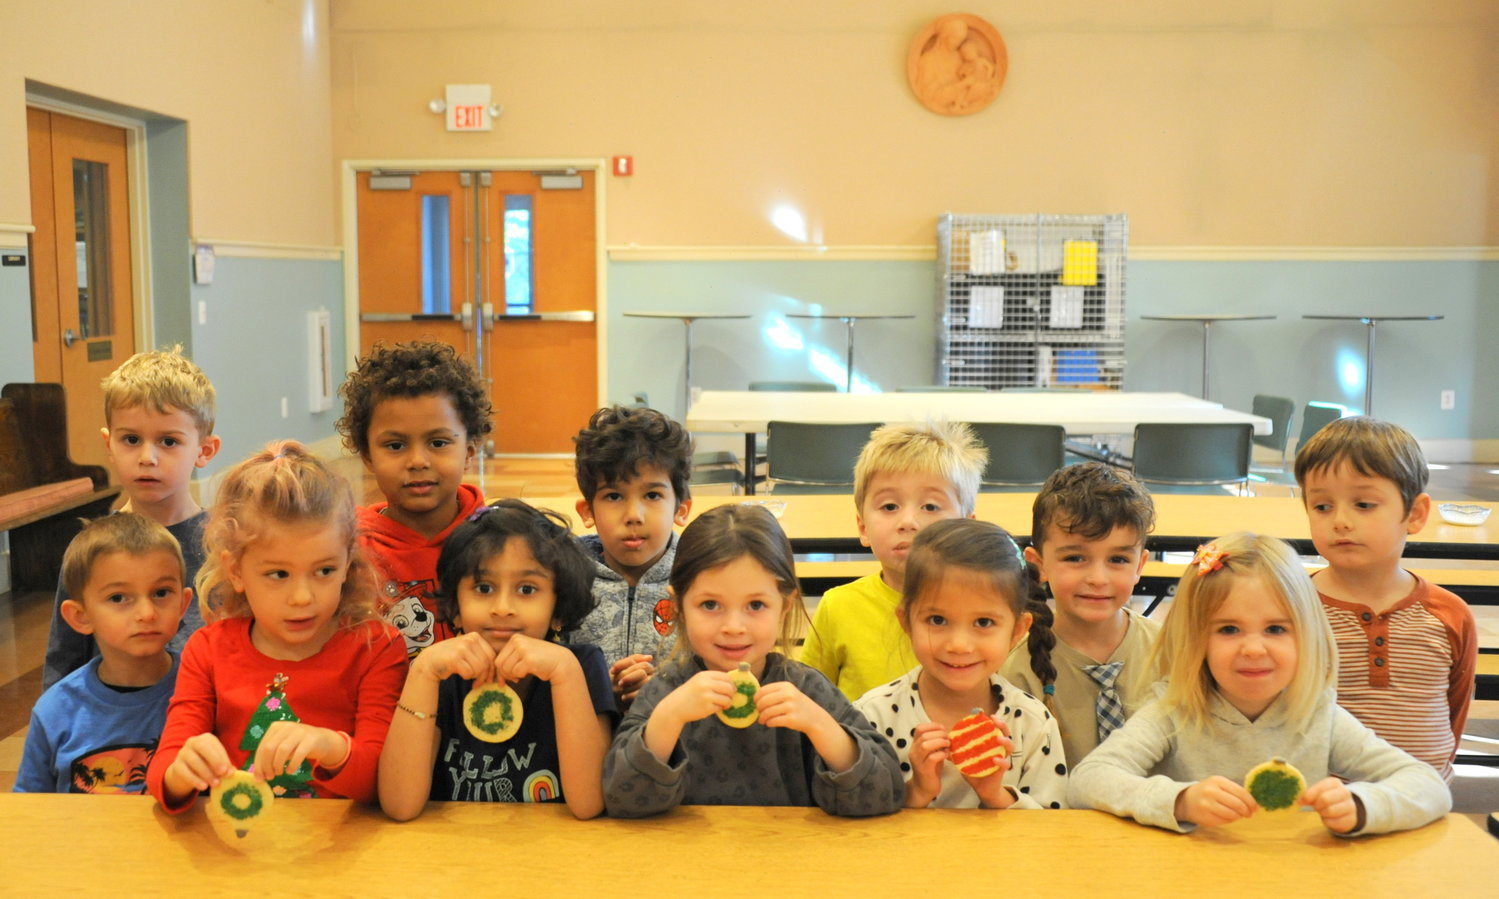 Little kids pose with their cookies for a picture during the Trinity Church Solebury annual cookie bake. At the winterholiday season, for 75 years, church volunteers have mixed, cut and baked the holiday cookies.